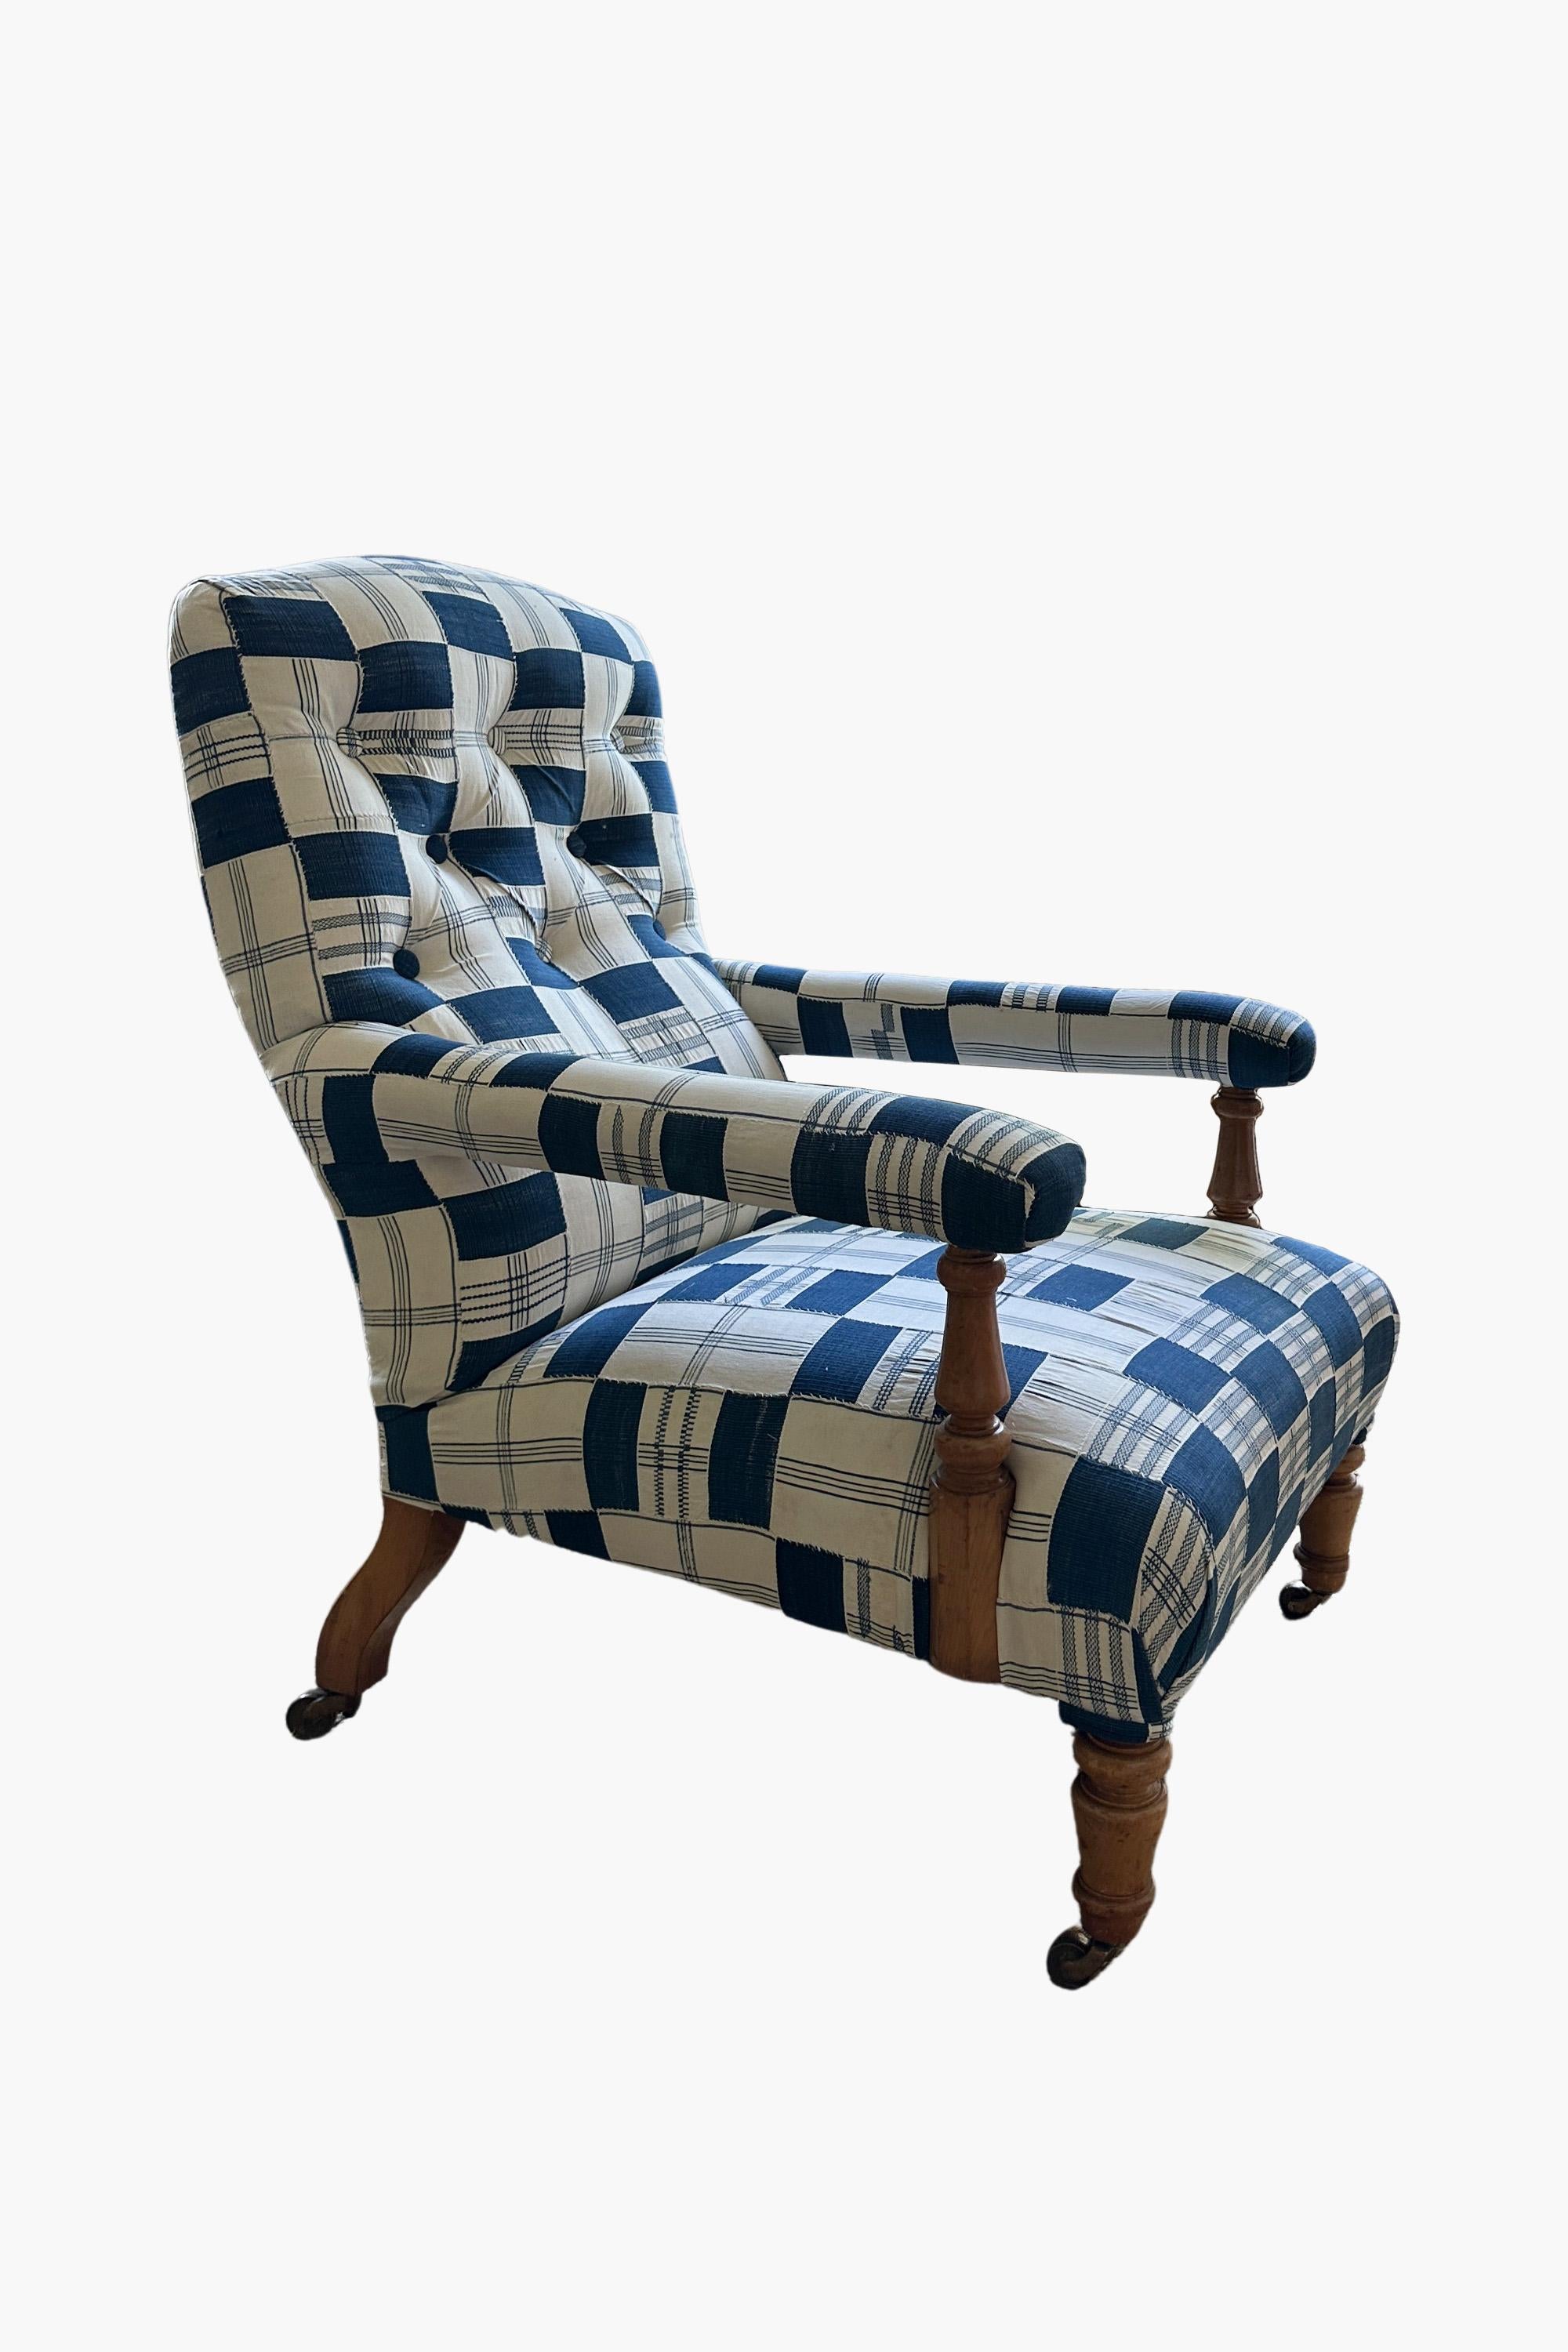 Late Victorian Open Armchair by Hindley & Son. upholstered in vintage Kente Cloth For Sale